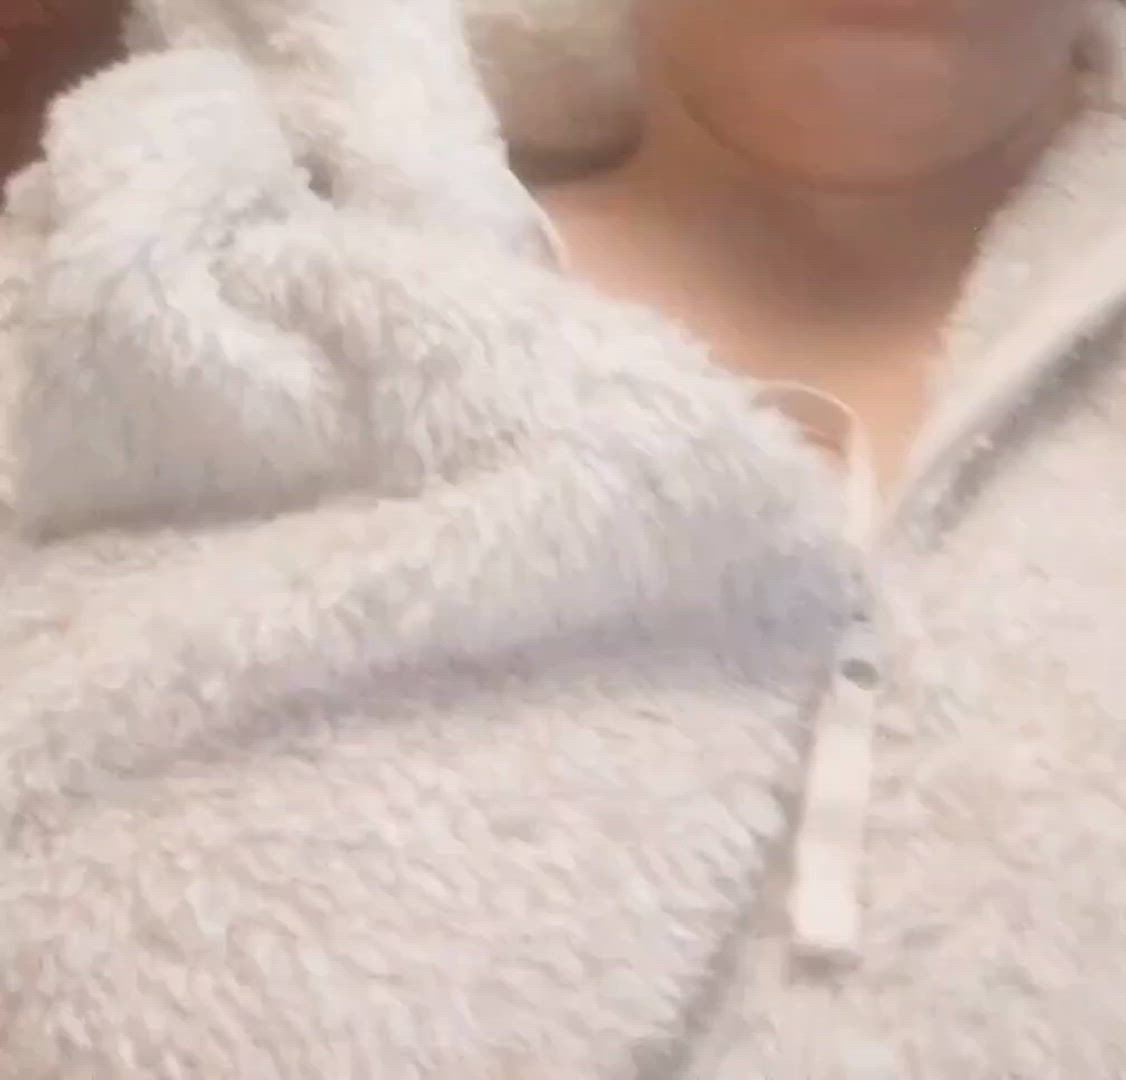 Big Tits porn video with onlyfans model lynnslustylinens <strong>@lynnslustylinens</strong>